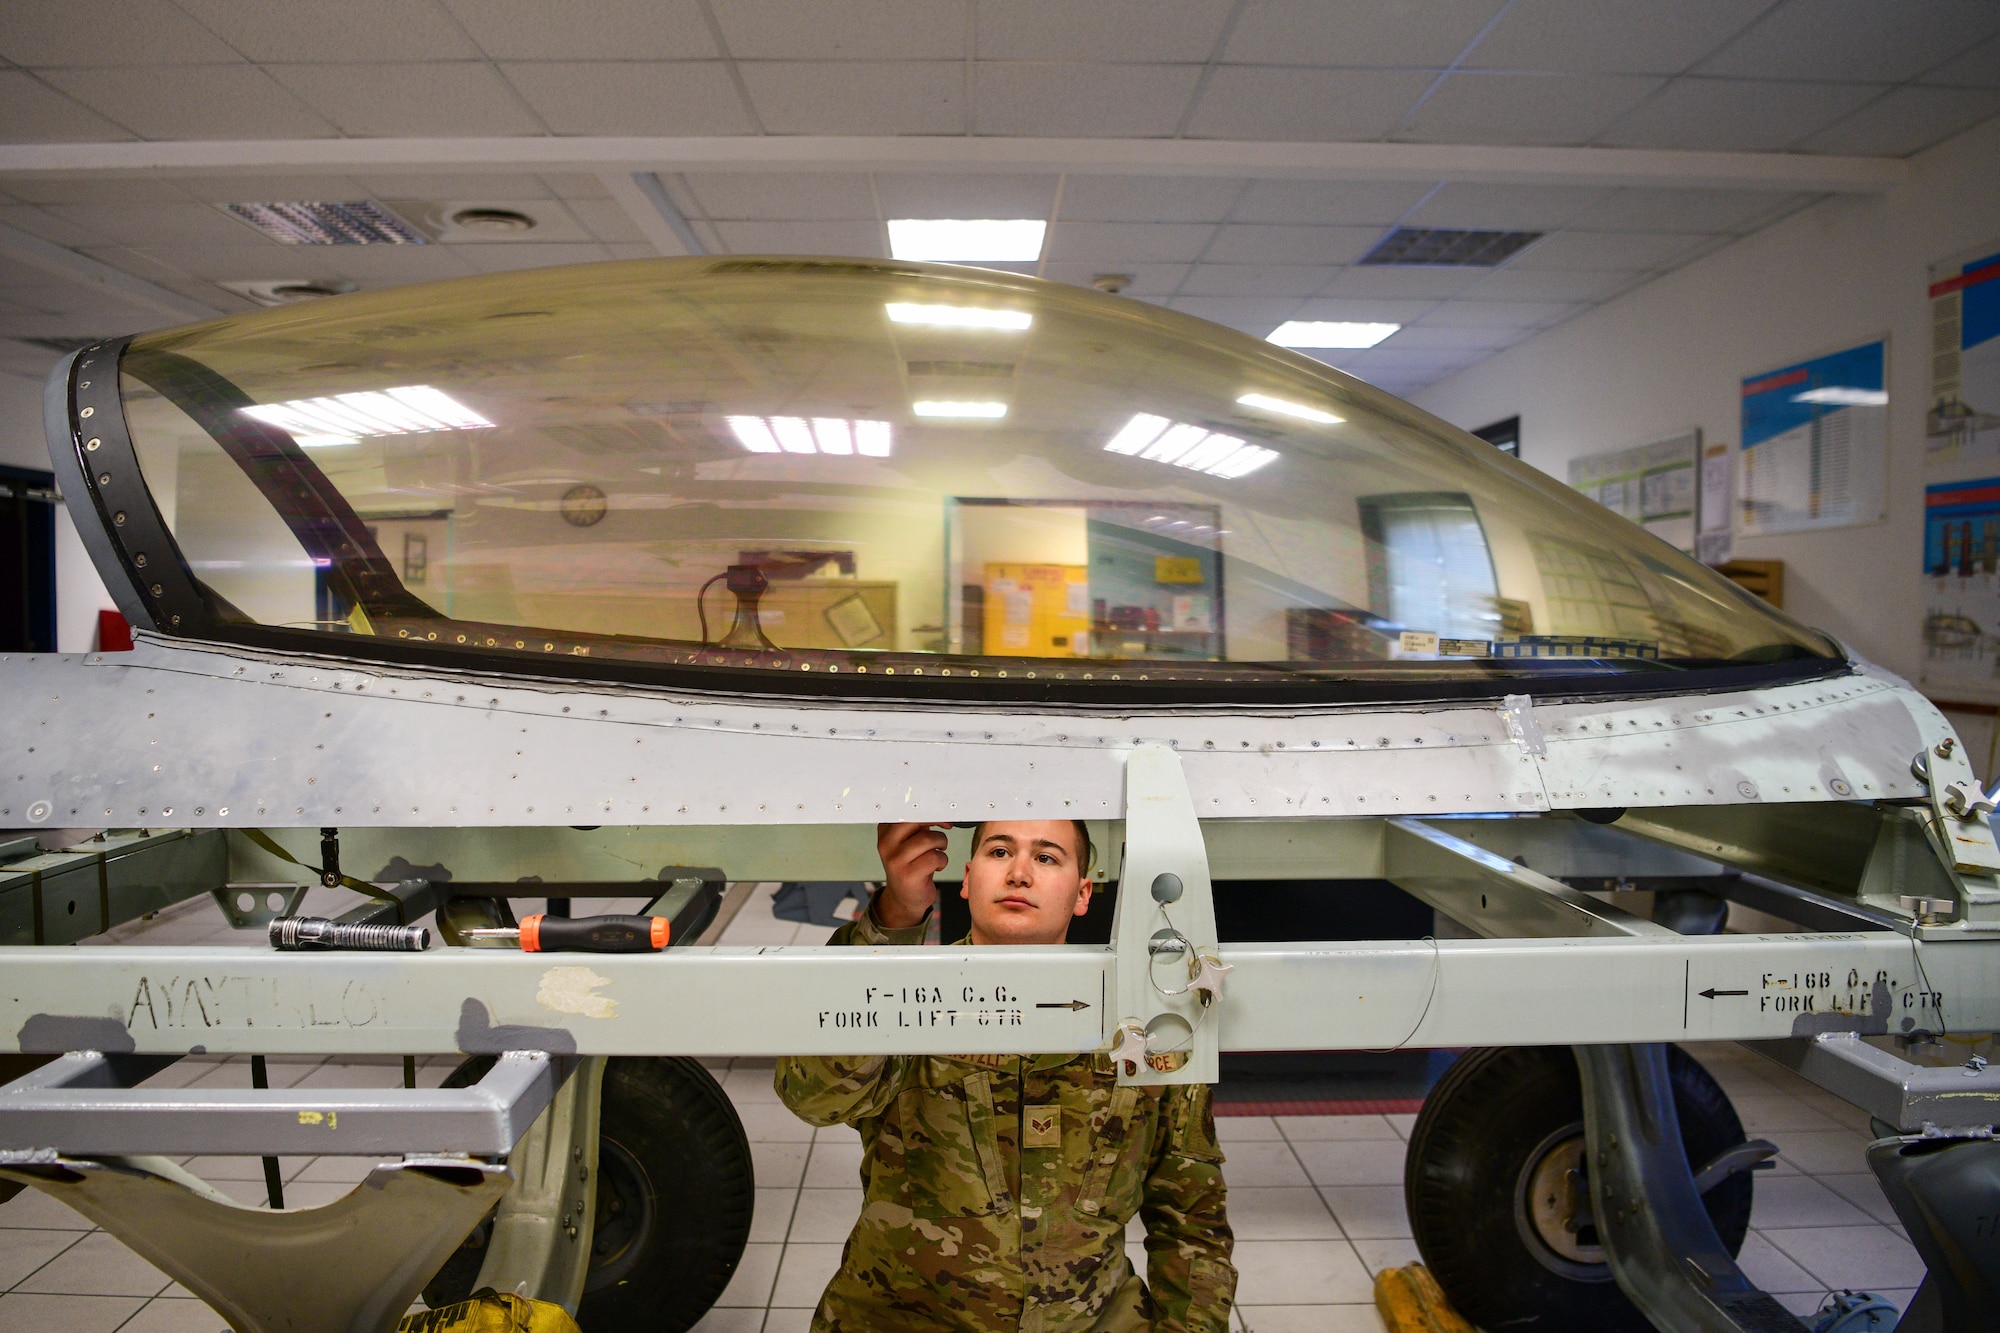 Senior Airman Reece Kutzli, 31st Maintenance Squadron Egress journeyman, screws bolts into an F-16 Fighting Falcon canopy at Aviano Air Base, Italy, Aug. 10, 2022. 31st MXS Egress specialists ensure the safety of pilots, making sure that if an aircraft ever goes down, the pilot is safe. (U.S. Air Force photo by Senior Airman Brooke Moeder)